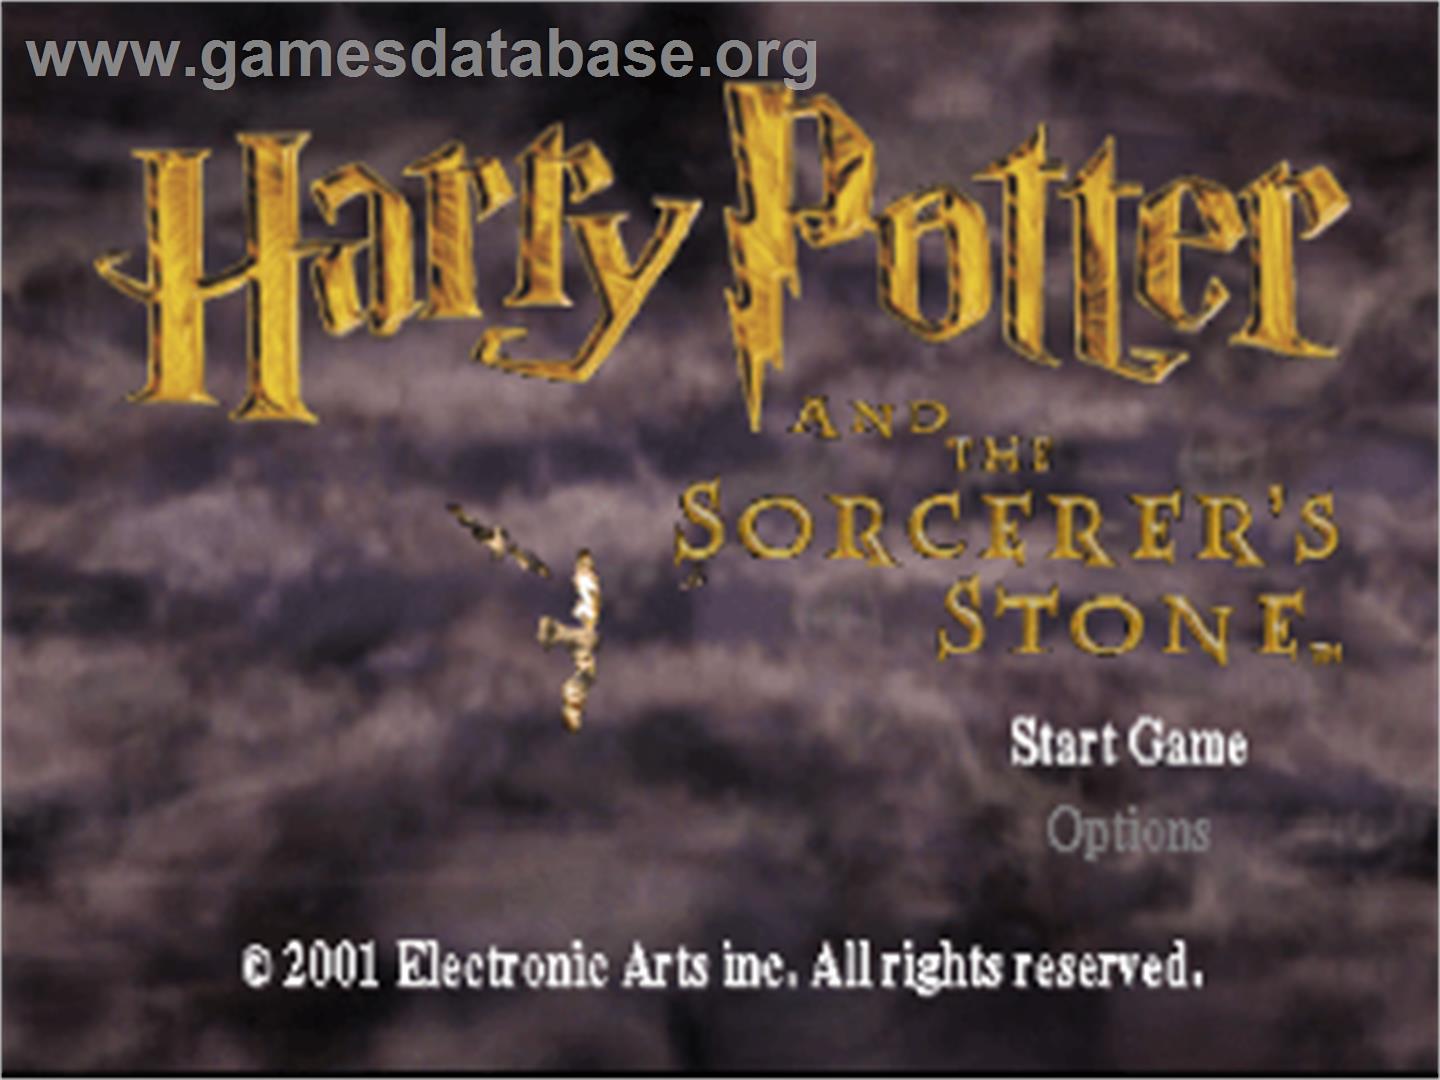 Harry Potter and the Sorcerer's Stone - Sony Playstation - Artwork - Title Screen